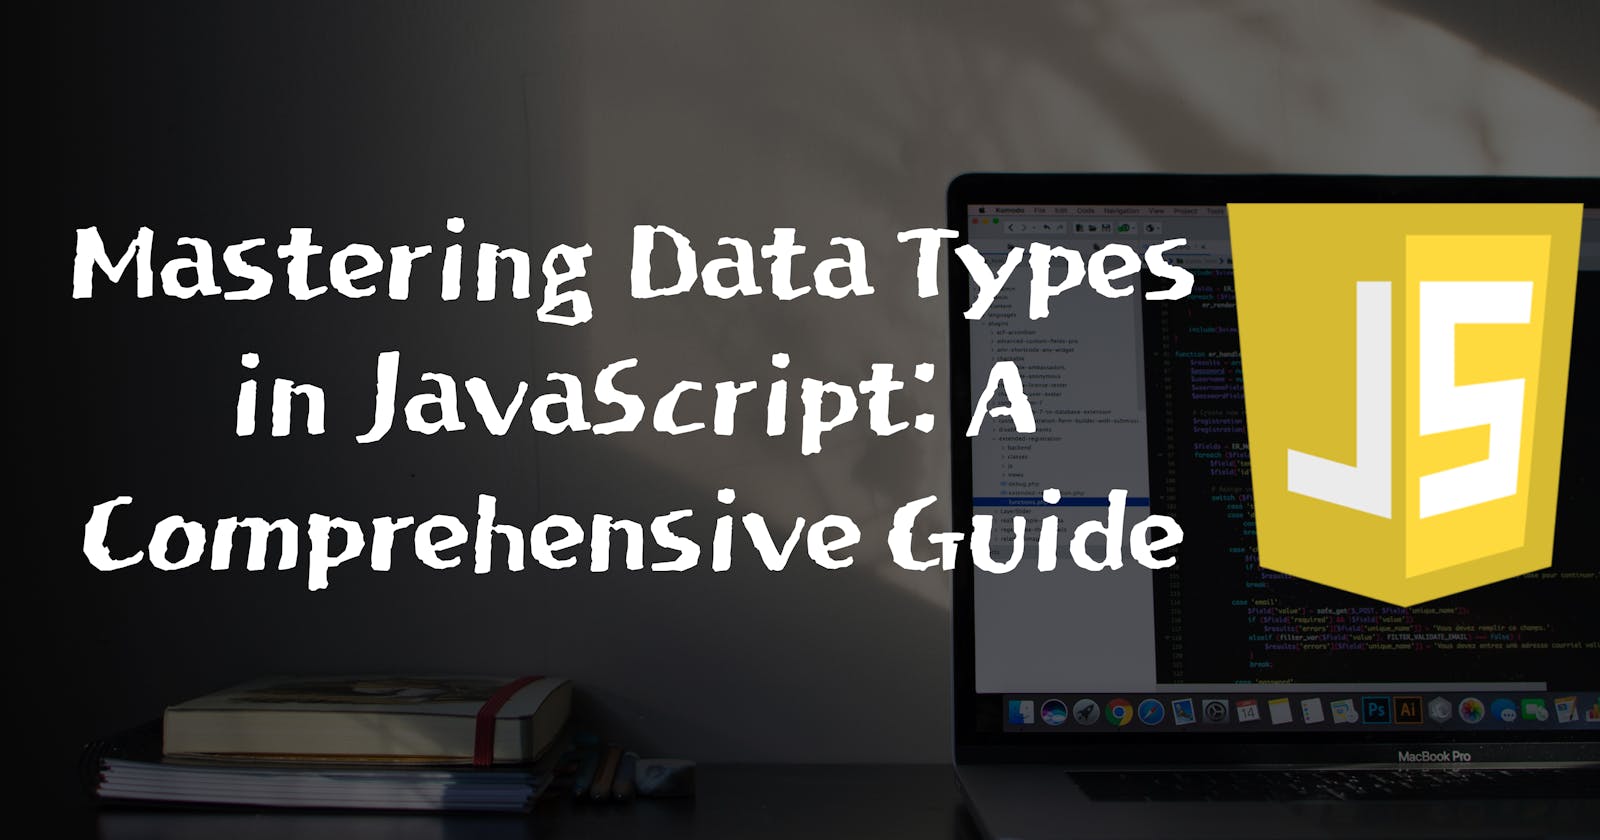 Mastering Data Types in JavaScript: A Comprehensive Guide